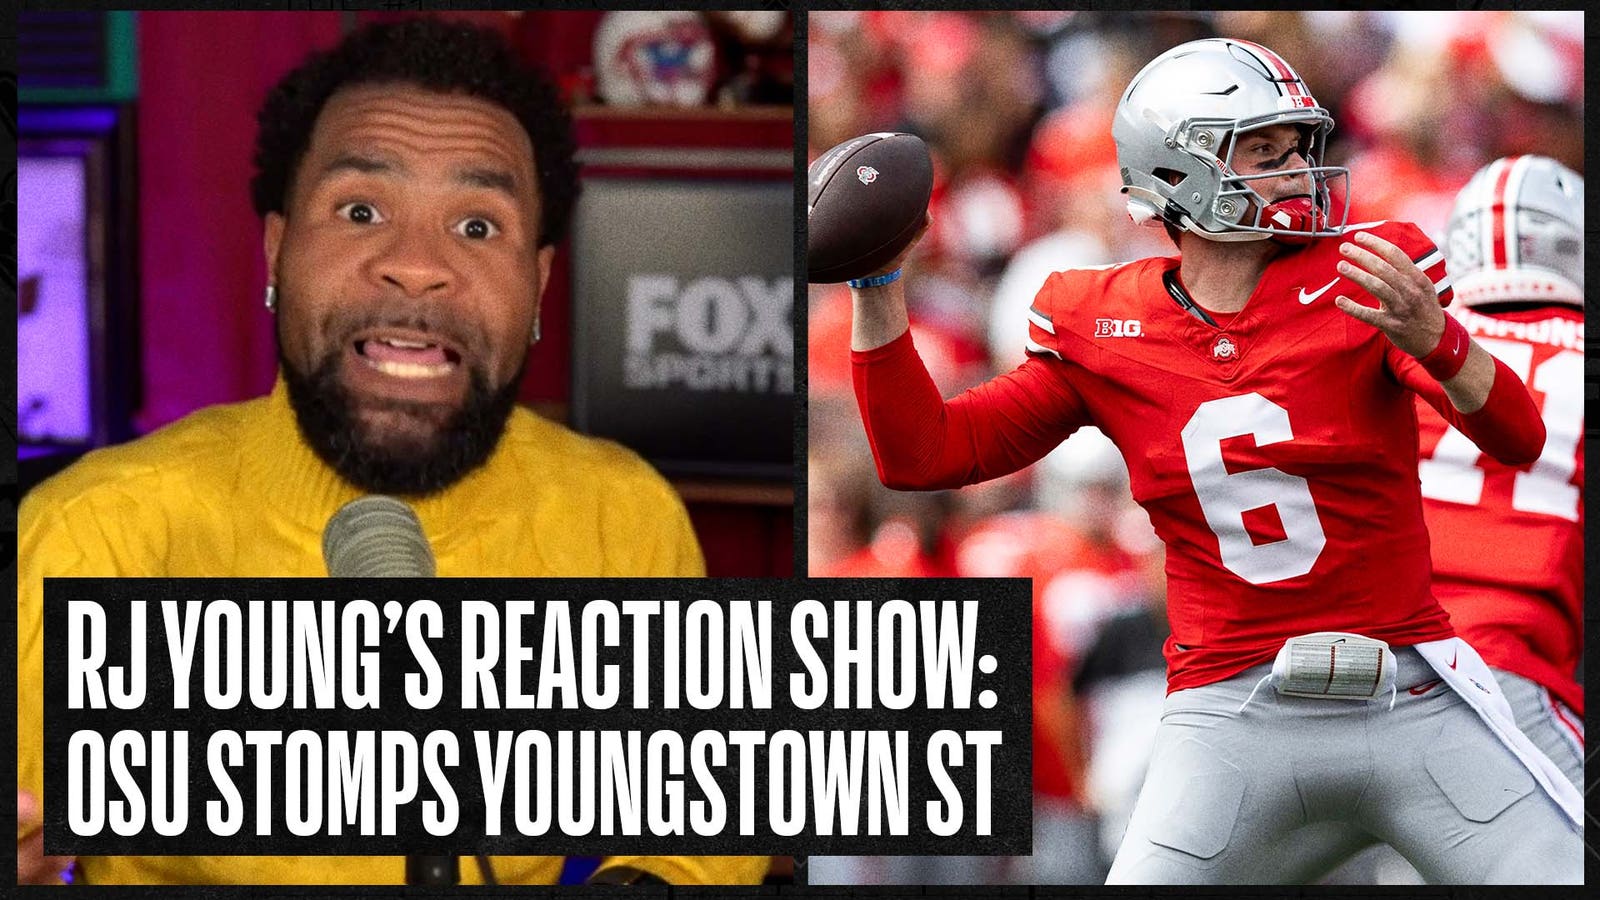 Ohio State stomps Youngstown State: Kyle McCord or Devin Brown?